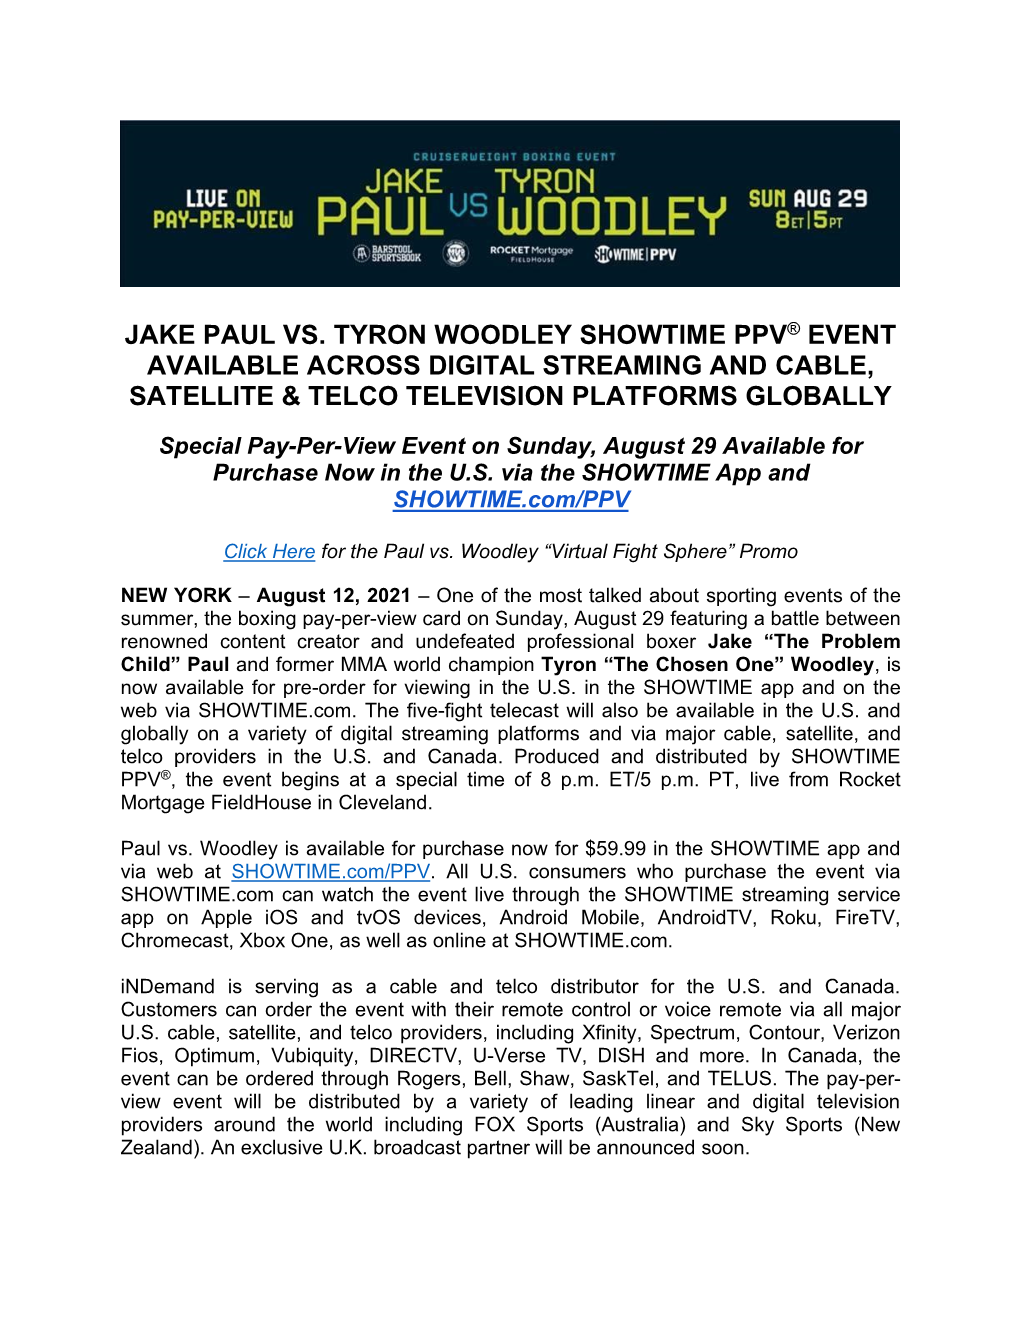 Jake Paul Vs. Tyron Woodley Showtime Ppv® Event Available Across Digital Streaming and Cable, Satellite & Telco Television